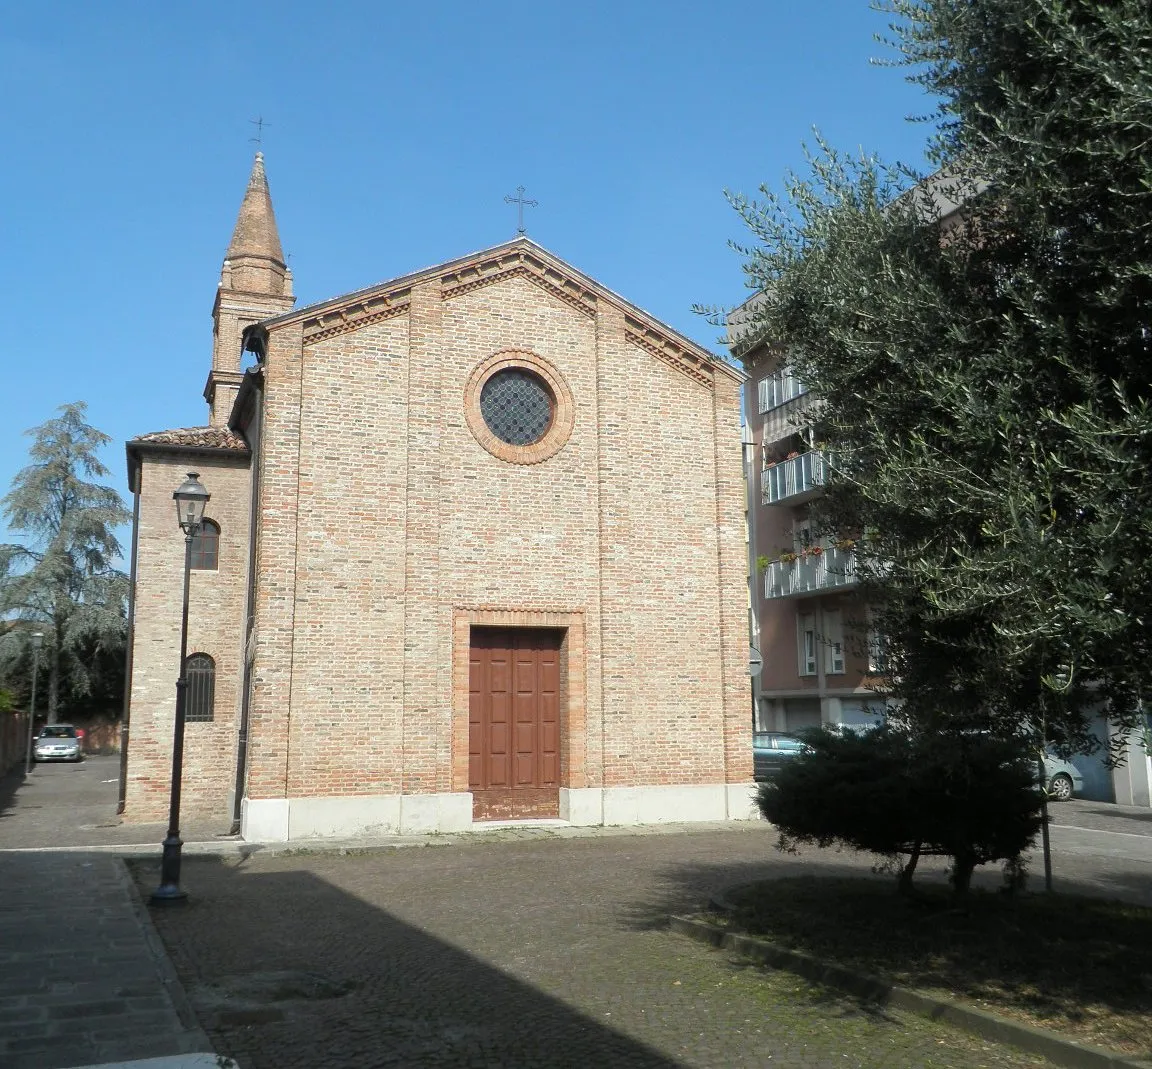 Photo showing: This is the church of Saint Mary and Saint Anne in Lendinara (Rovigo) in the region of Veneto in the northern Italy